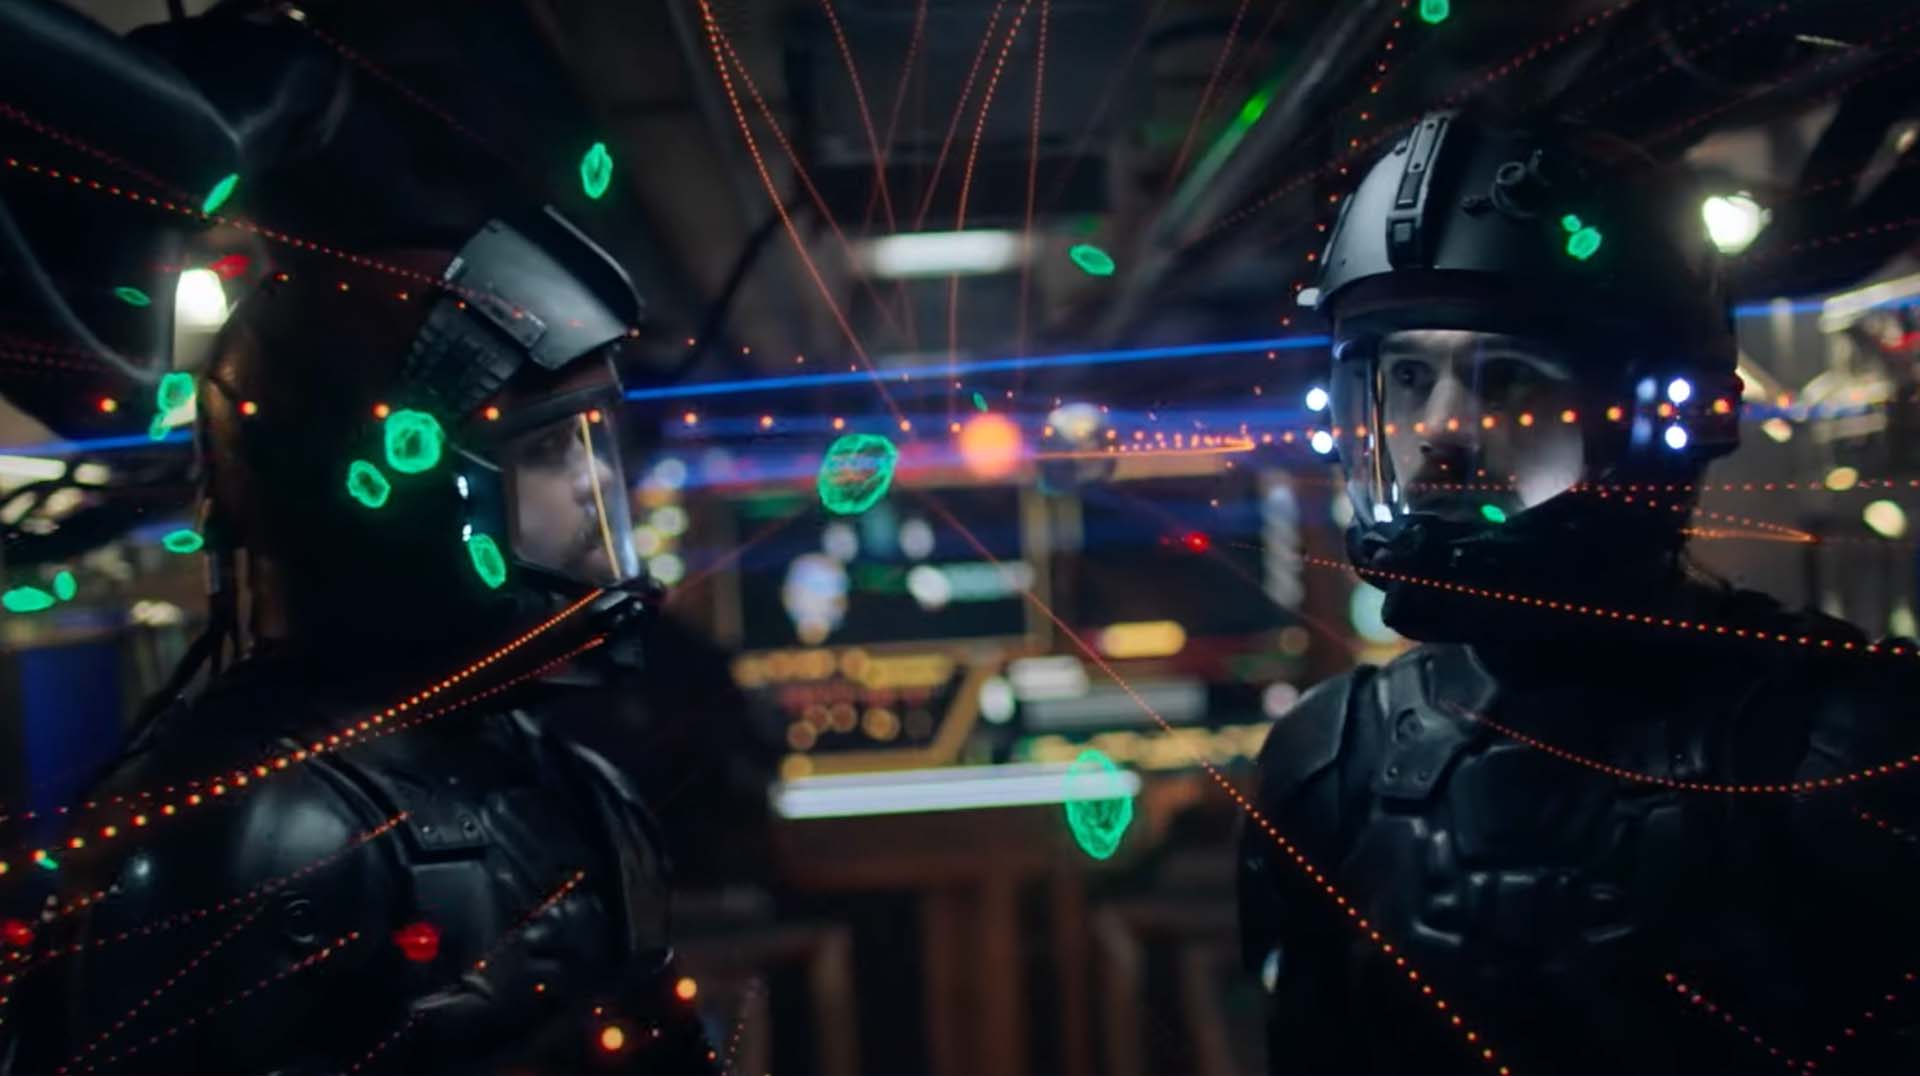 11 Shows Like The Expanse to to Watch If You Miss The Expanse - TV Guide